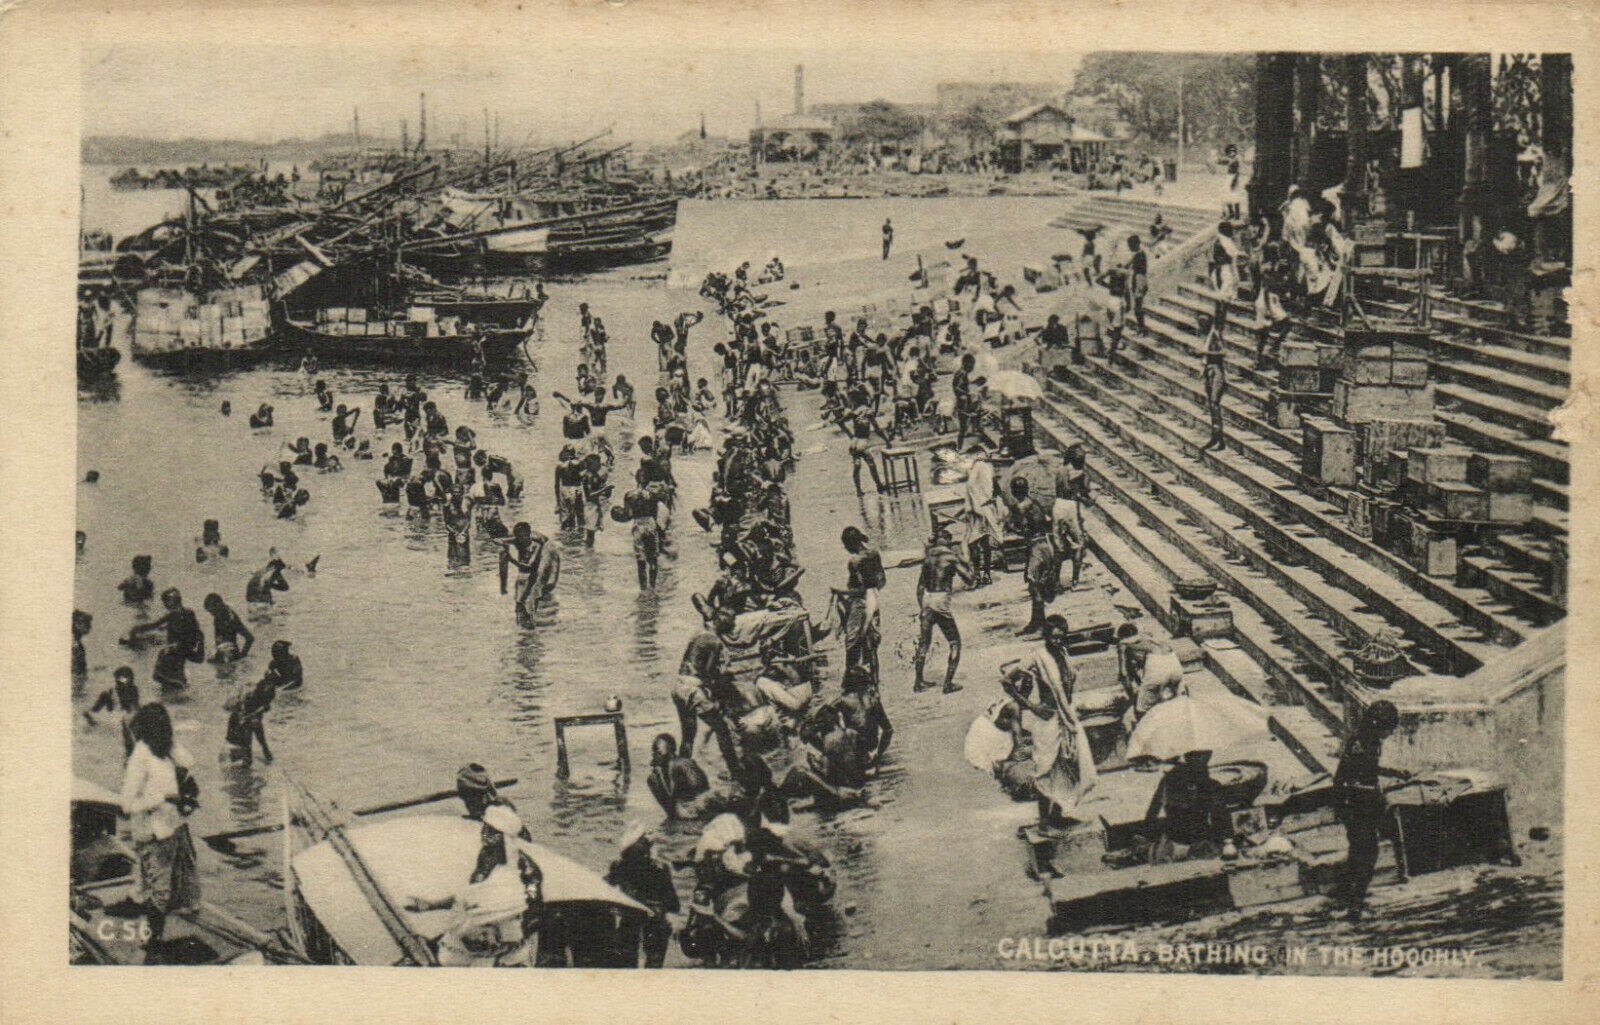 PC CPA INDIA, CALCUTTA, BATHING IN THE HOOHLY, Vintage Postcard (b13756)